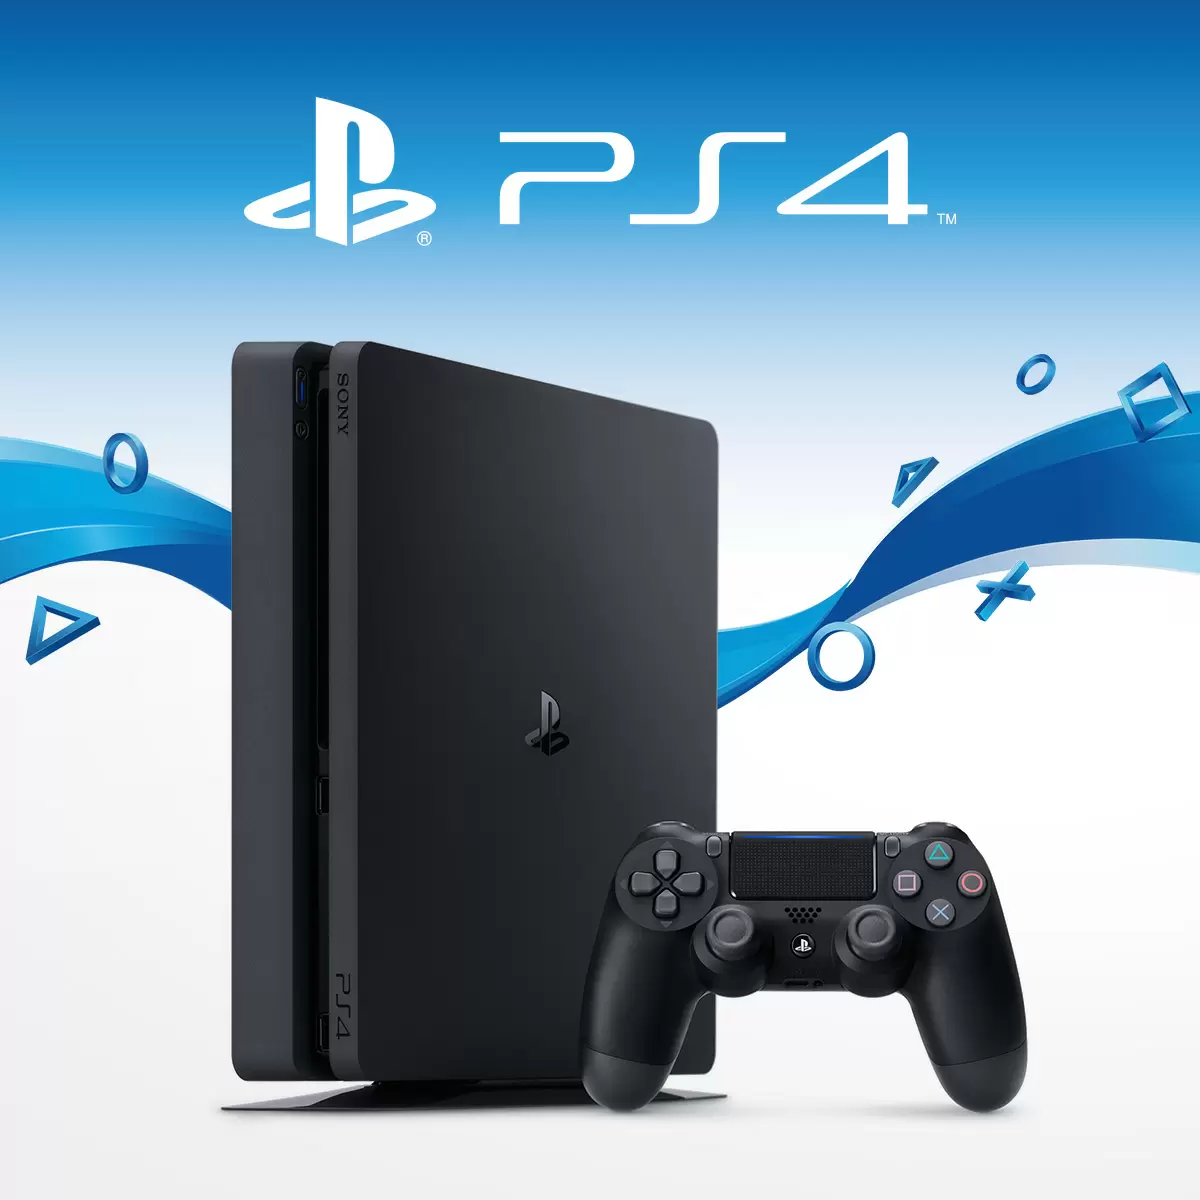 Sony Ps4 500GB slim Price in Pakistan, Specifications, Features